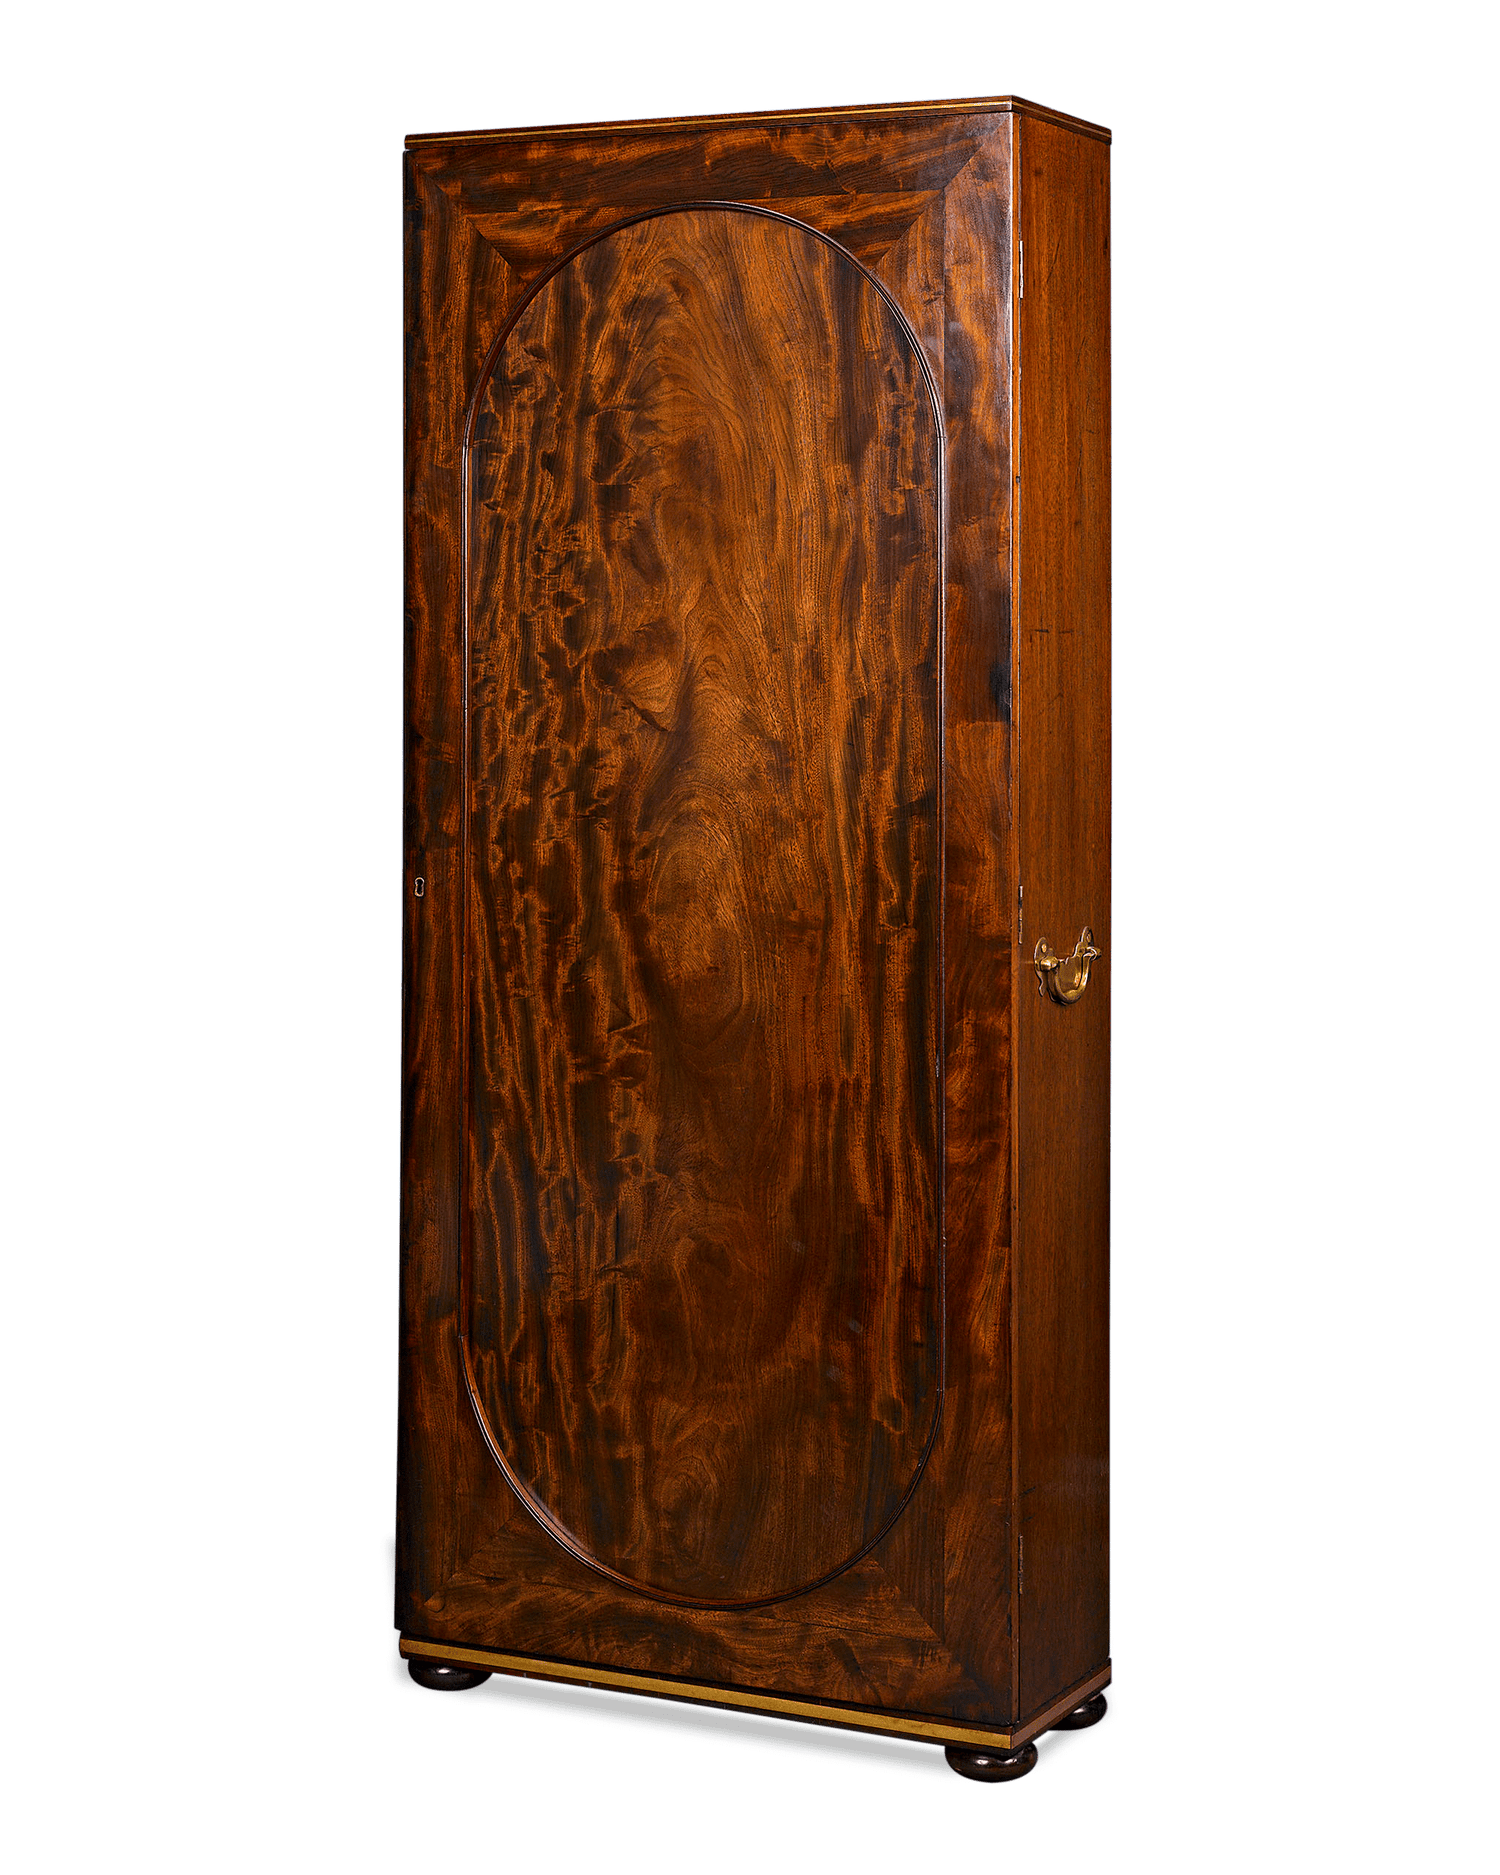 Lustrous Cuban mahogany and classical design make this case a flawless addition to any decor